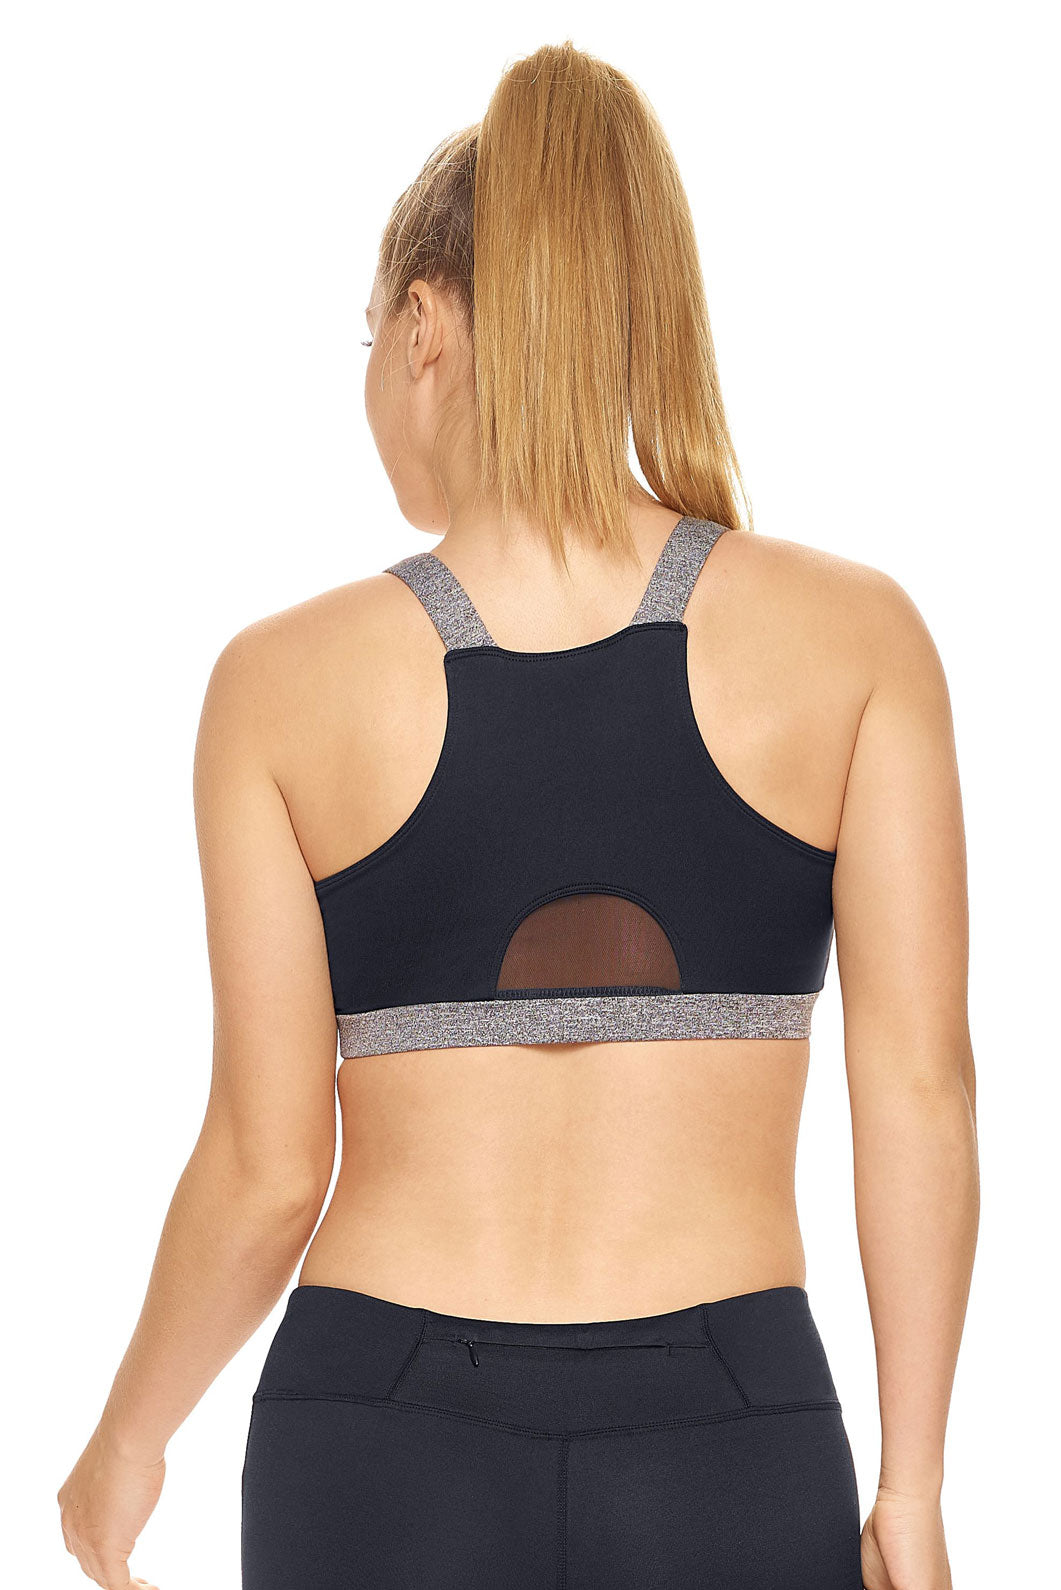 Expert Brand Wholesale Women's Airstretch Calypso Mesh Sports Bra in Black Charcoal Image 3#black-heather-charcoal